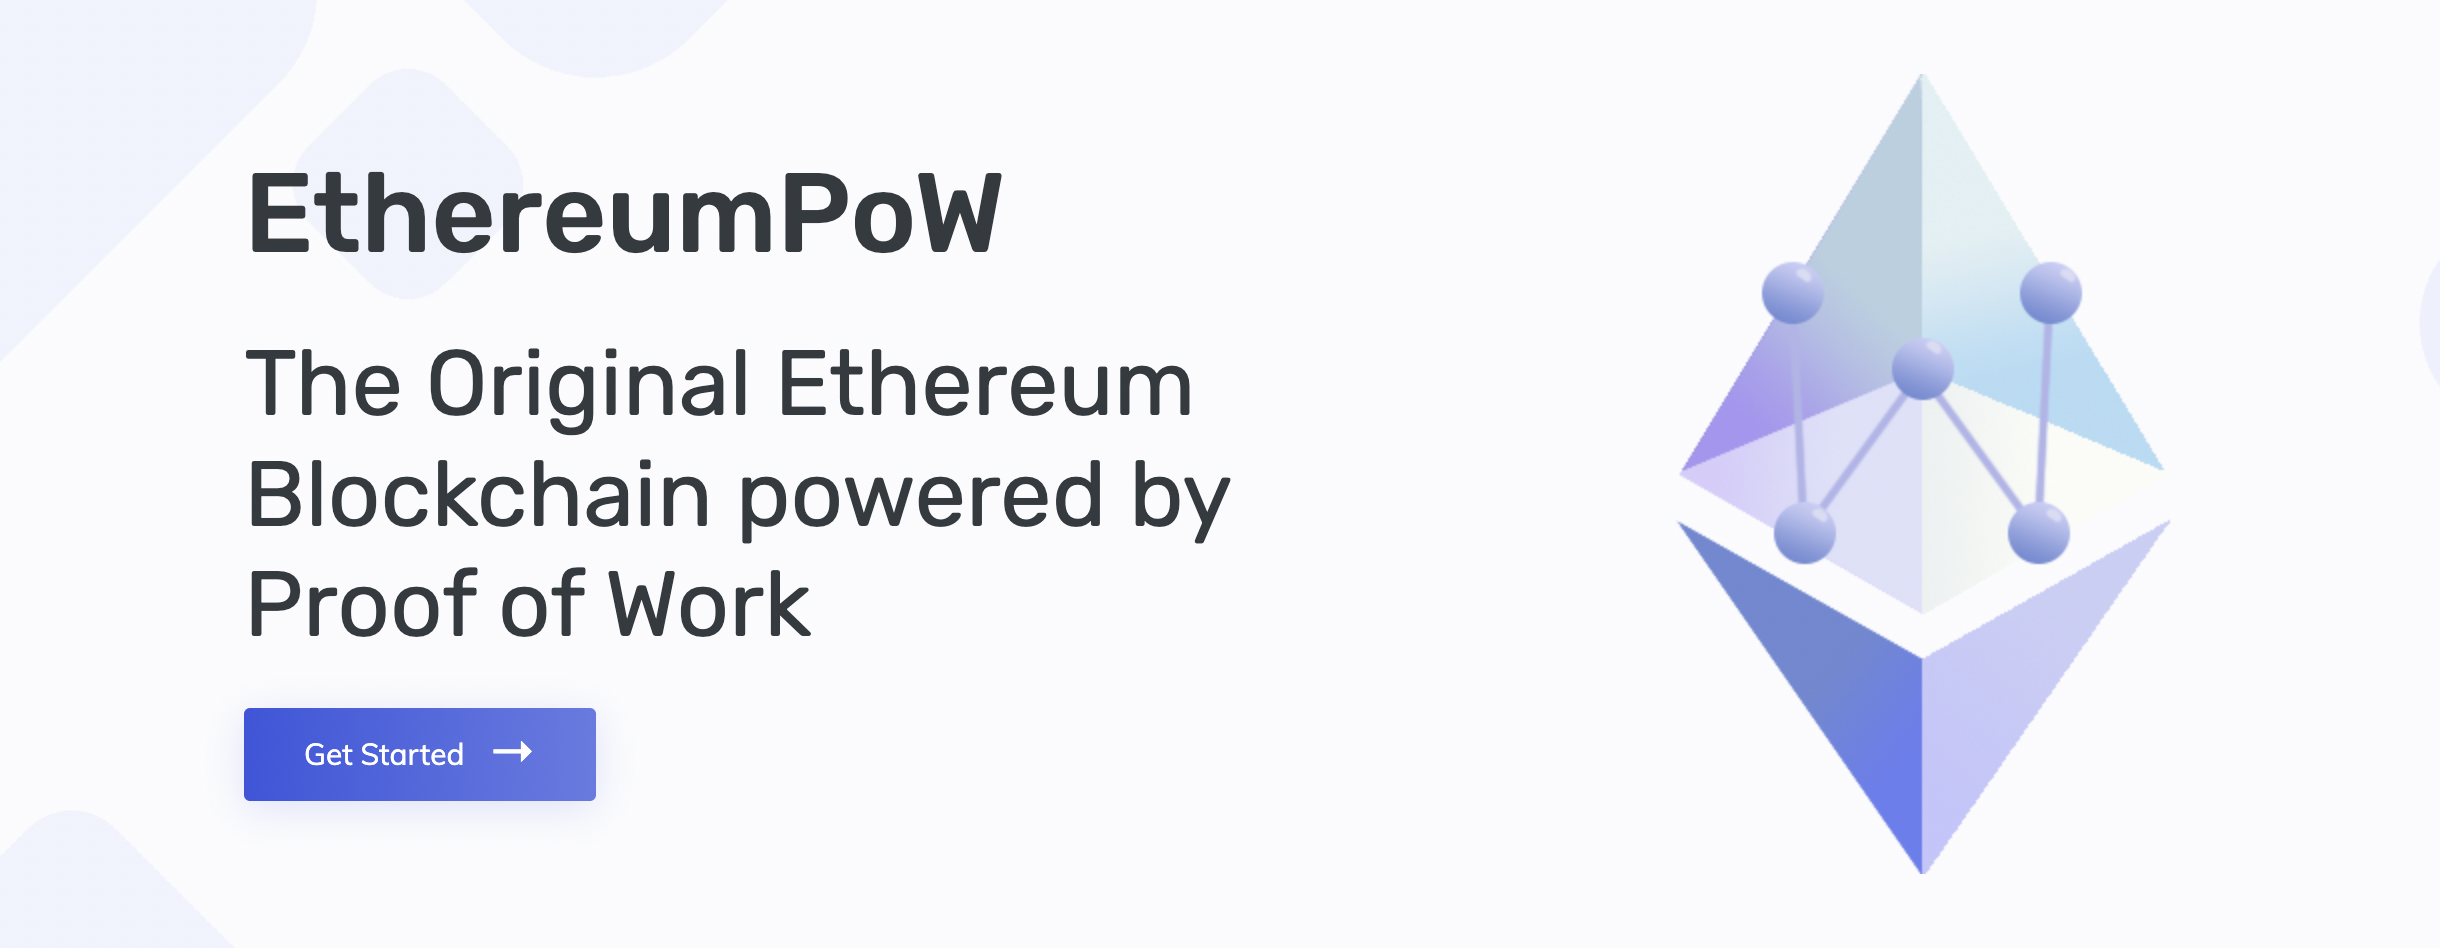 FREE ETHW Coins In EthereumPoW Hard Fork Crypto Airdrop!